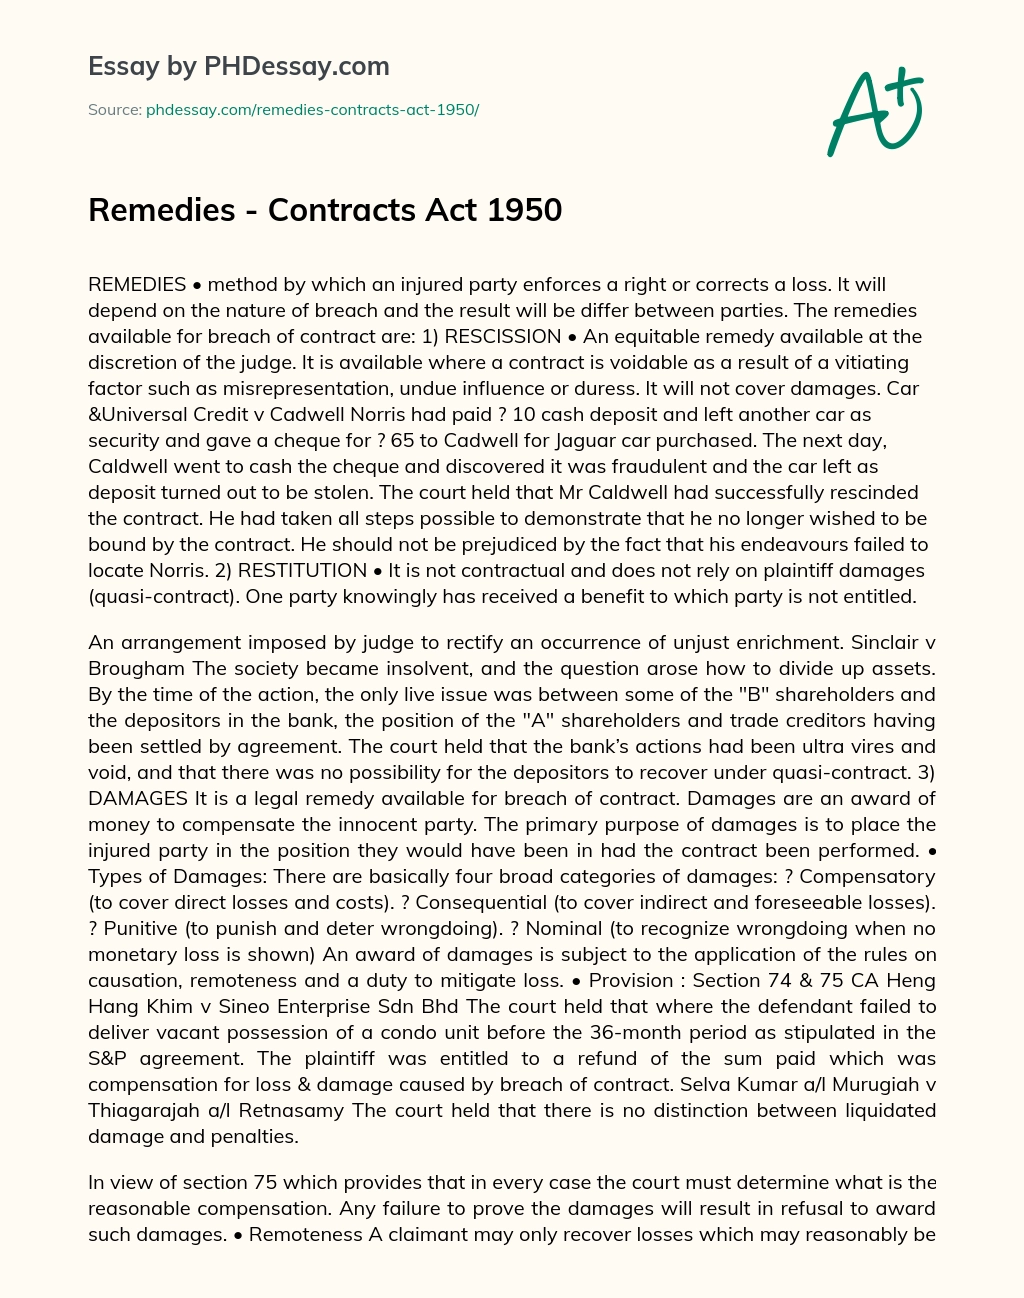 Remedies – Contracts Act 1950 essay